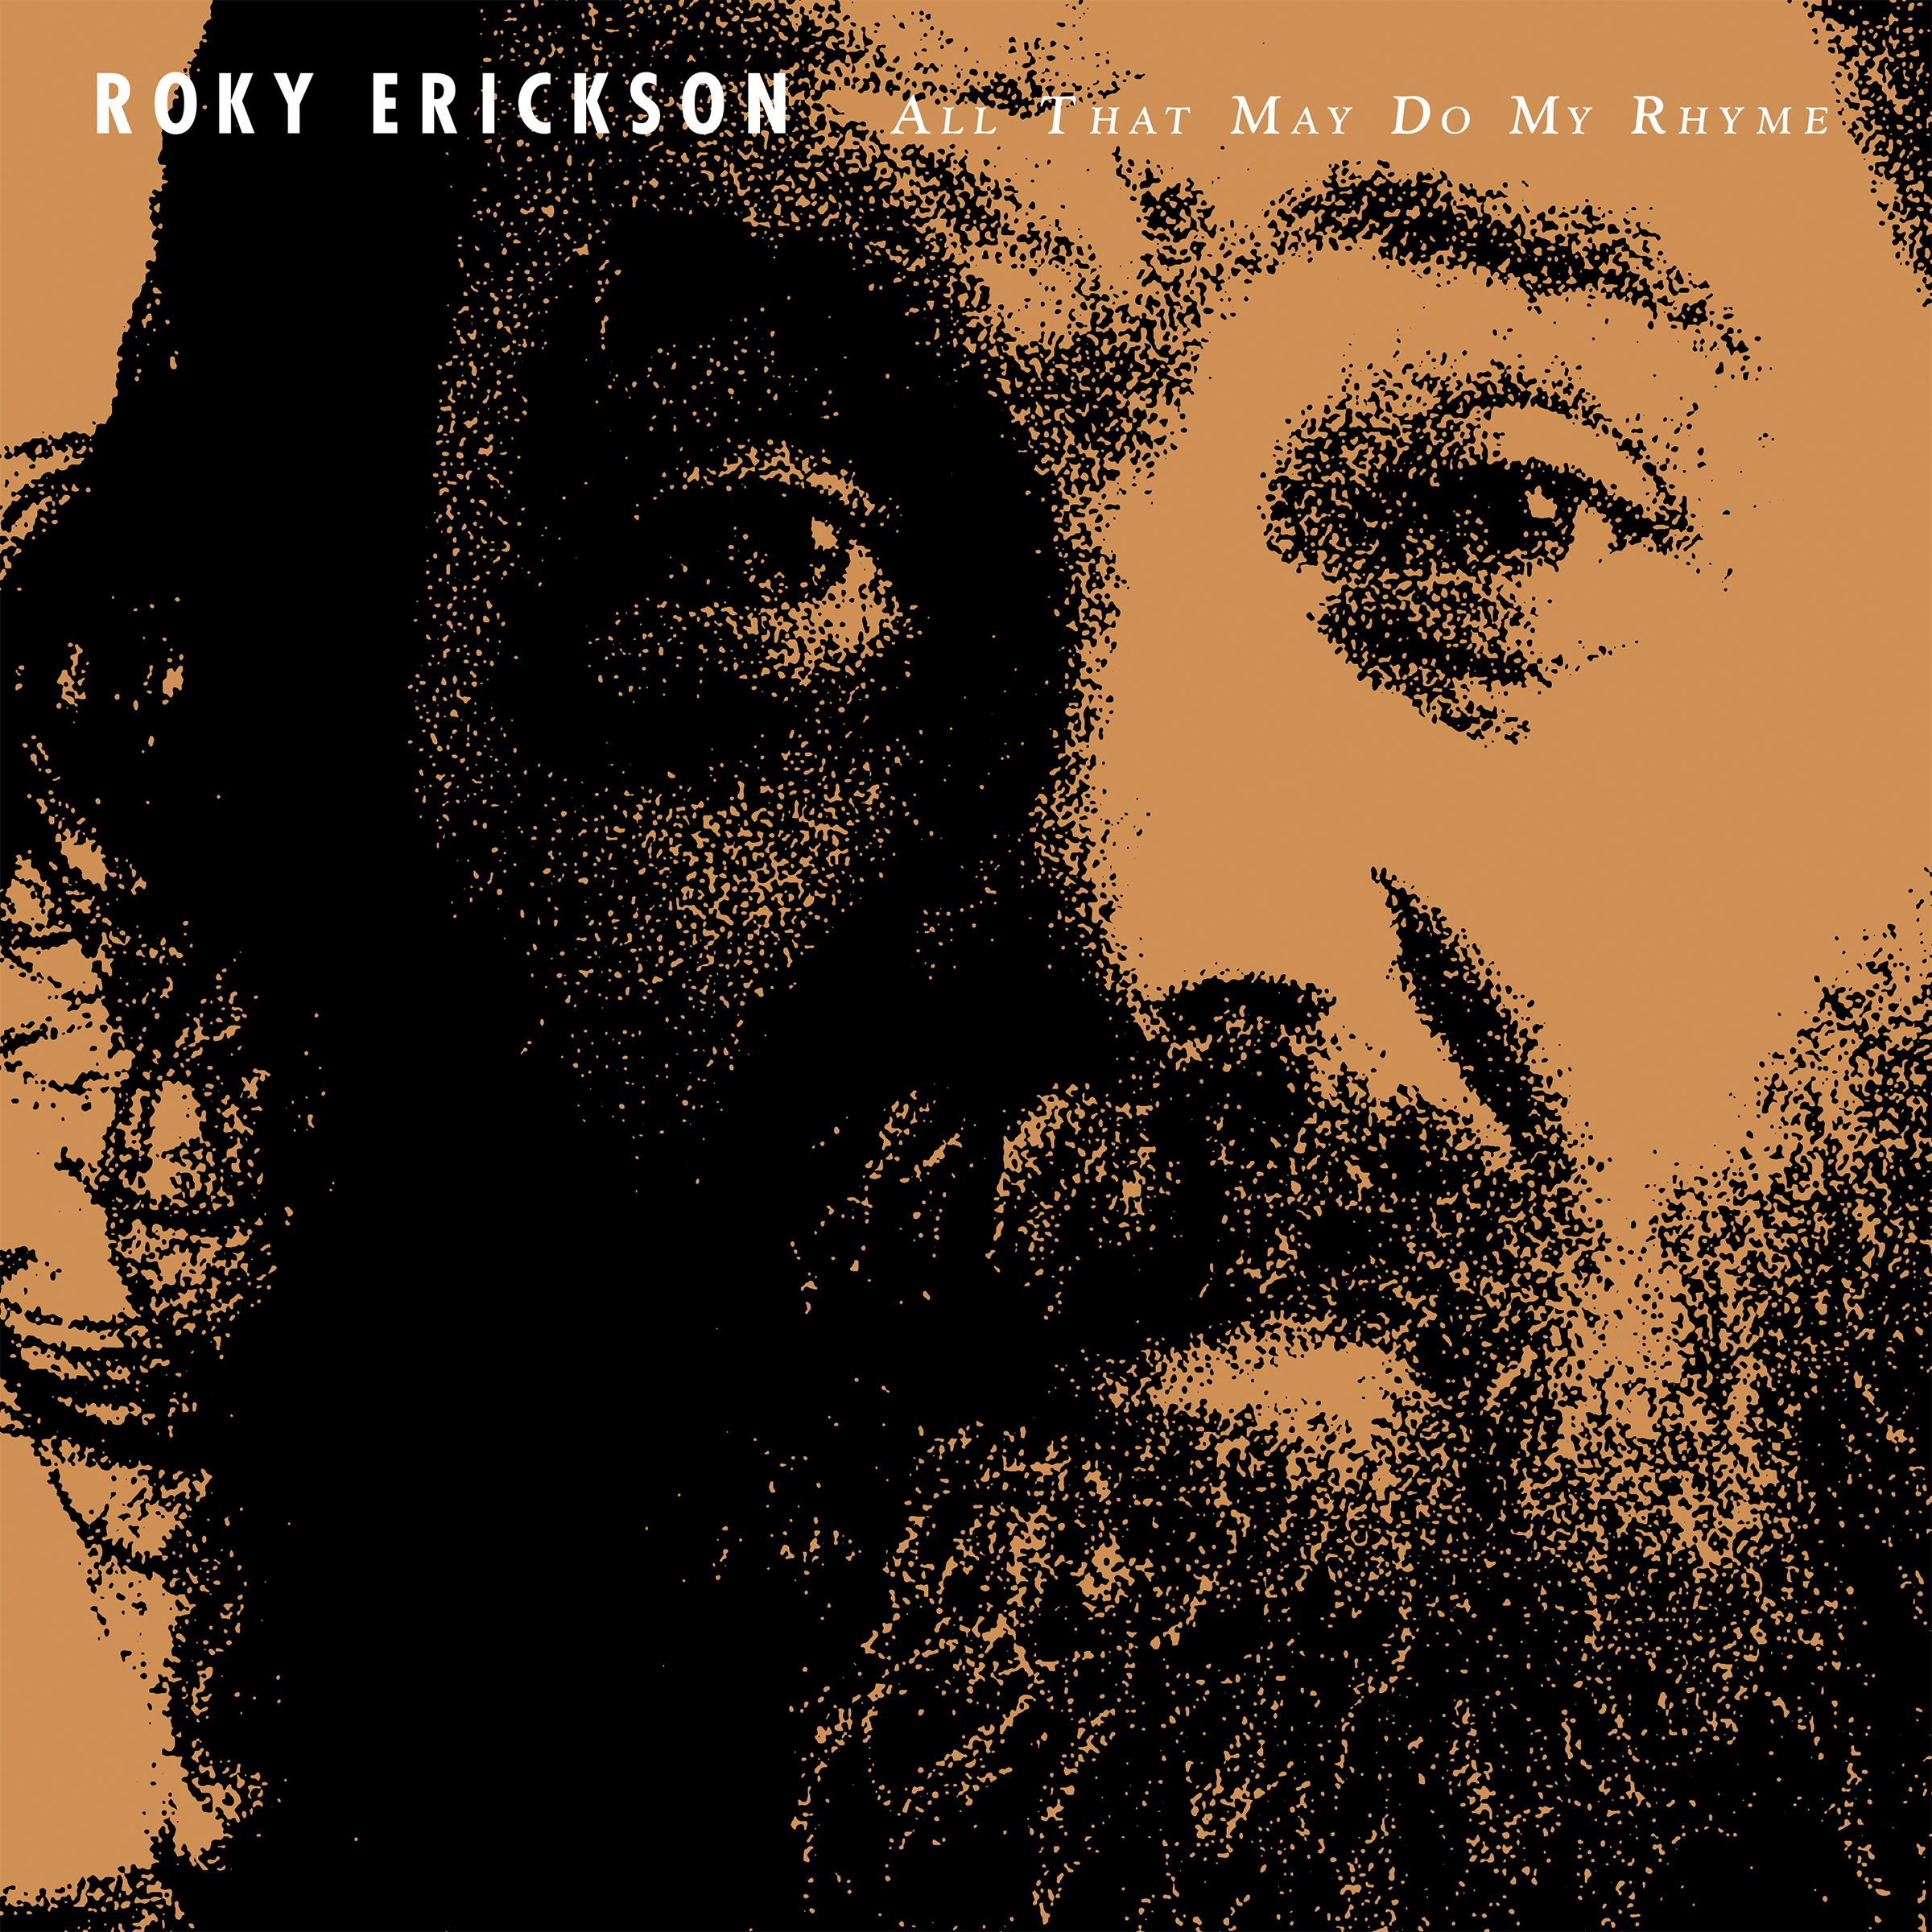 Erickson, Roky - All That May Do My Rhyme